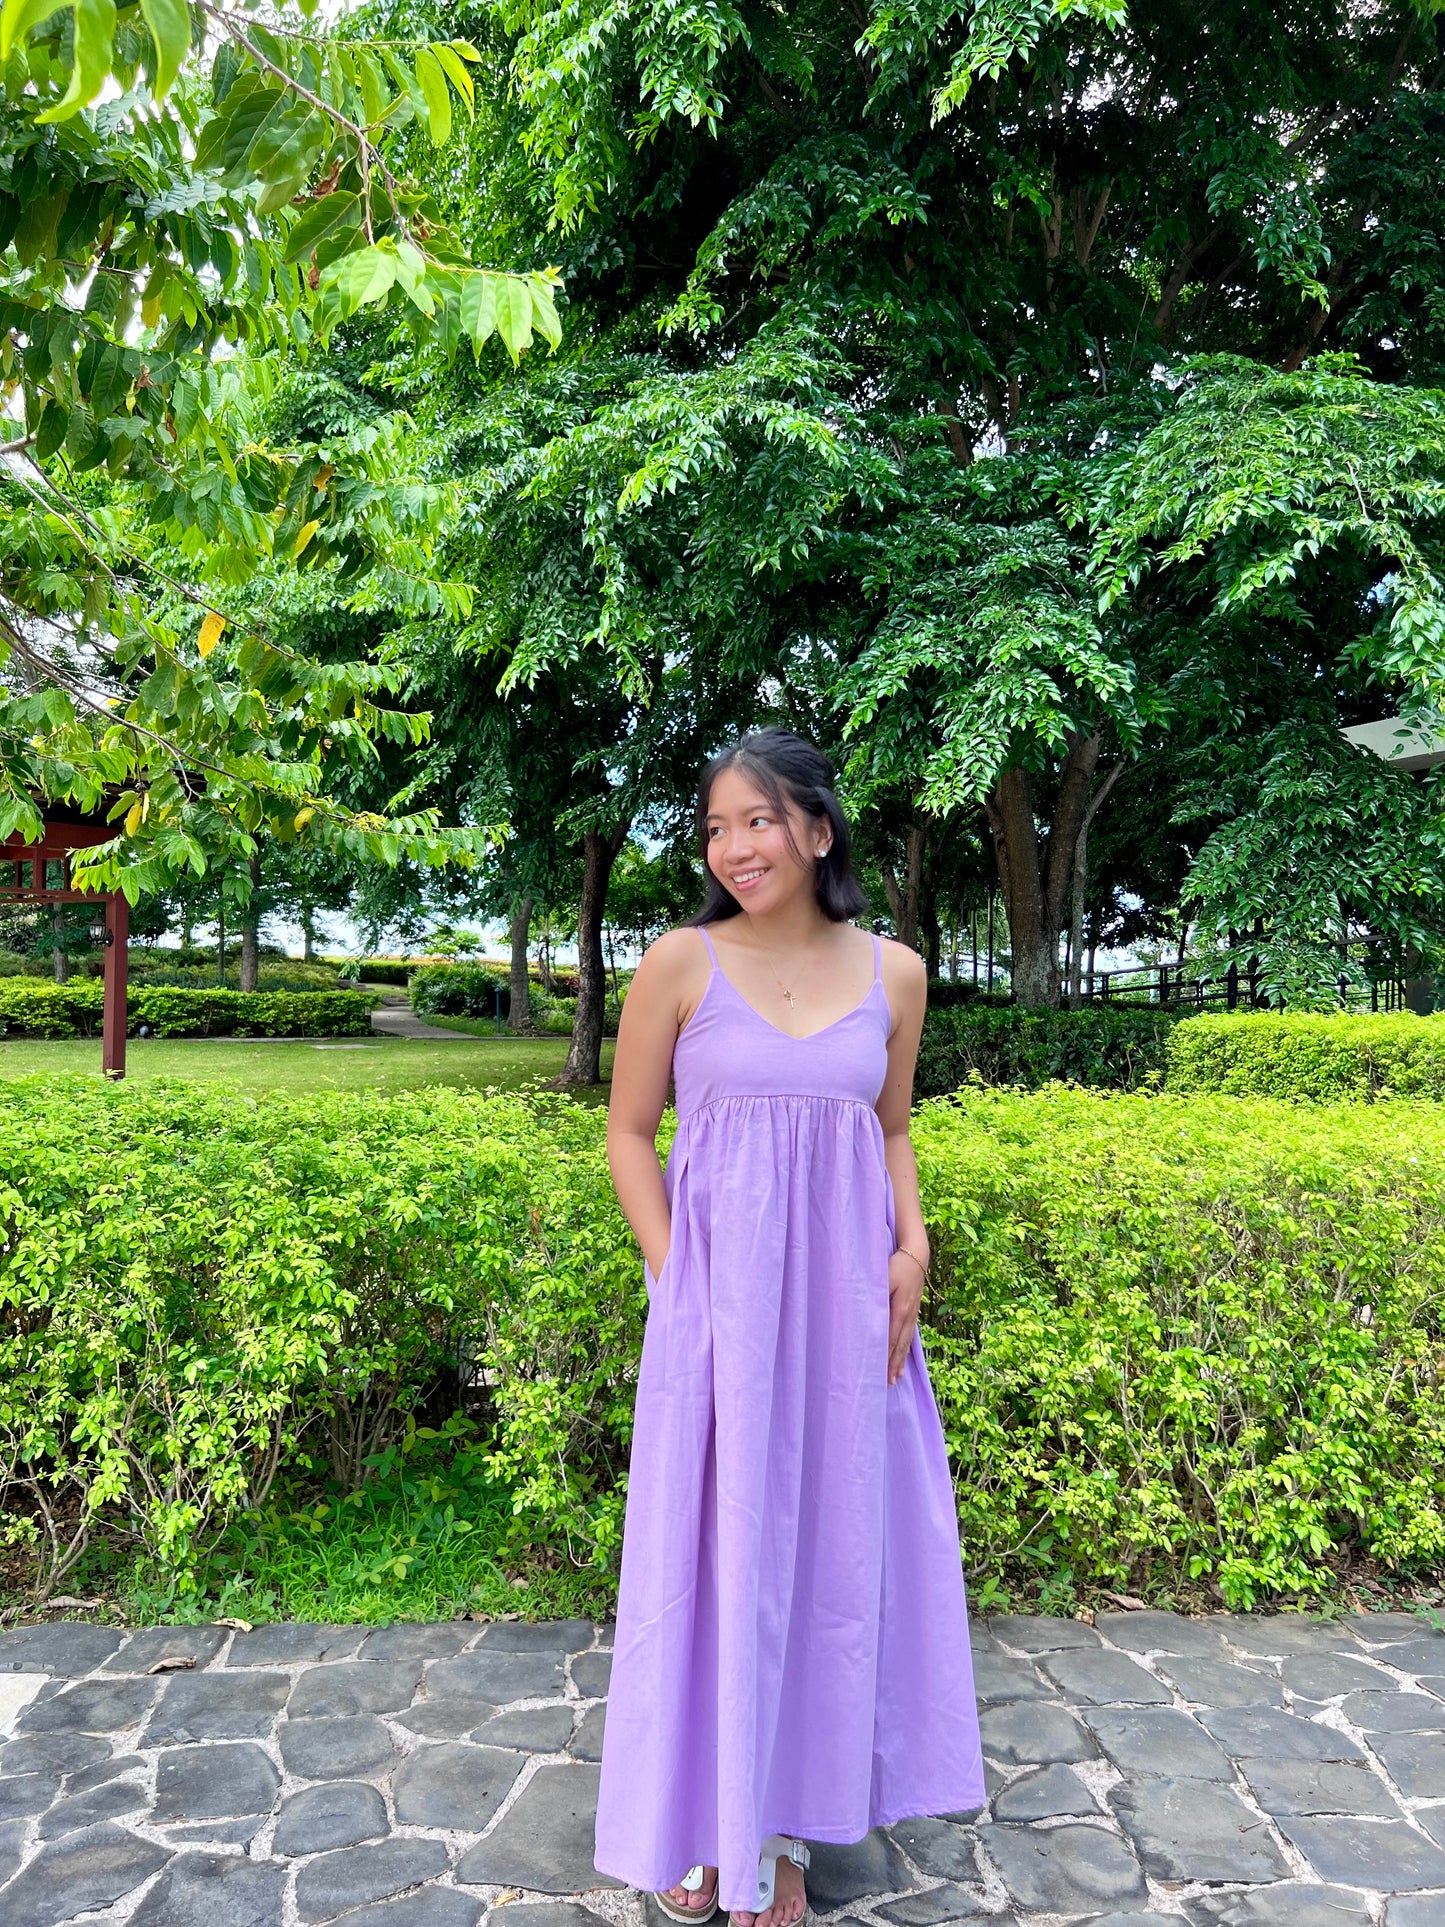 Tuscany Dress in Lavender